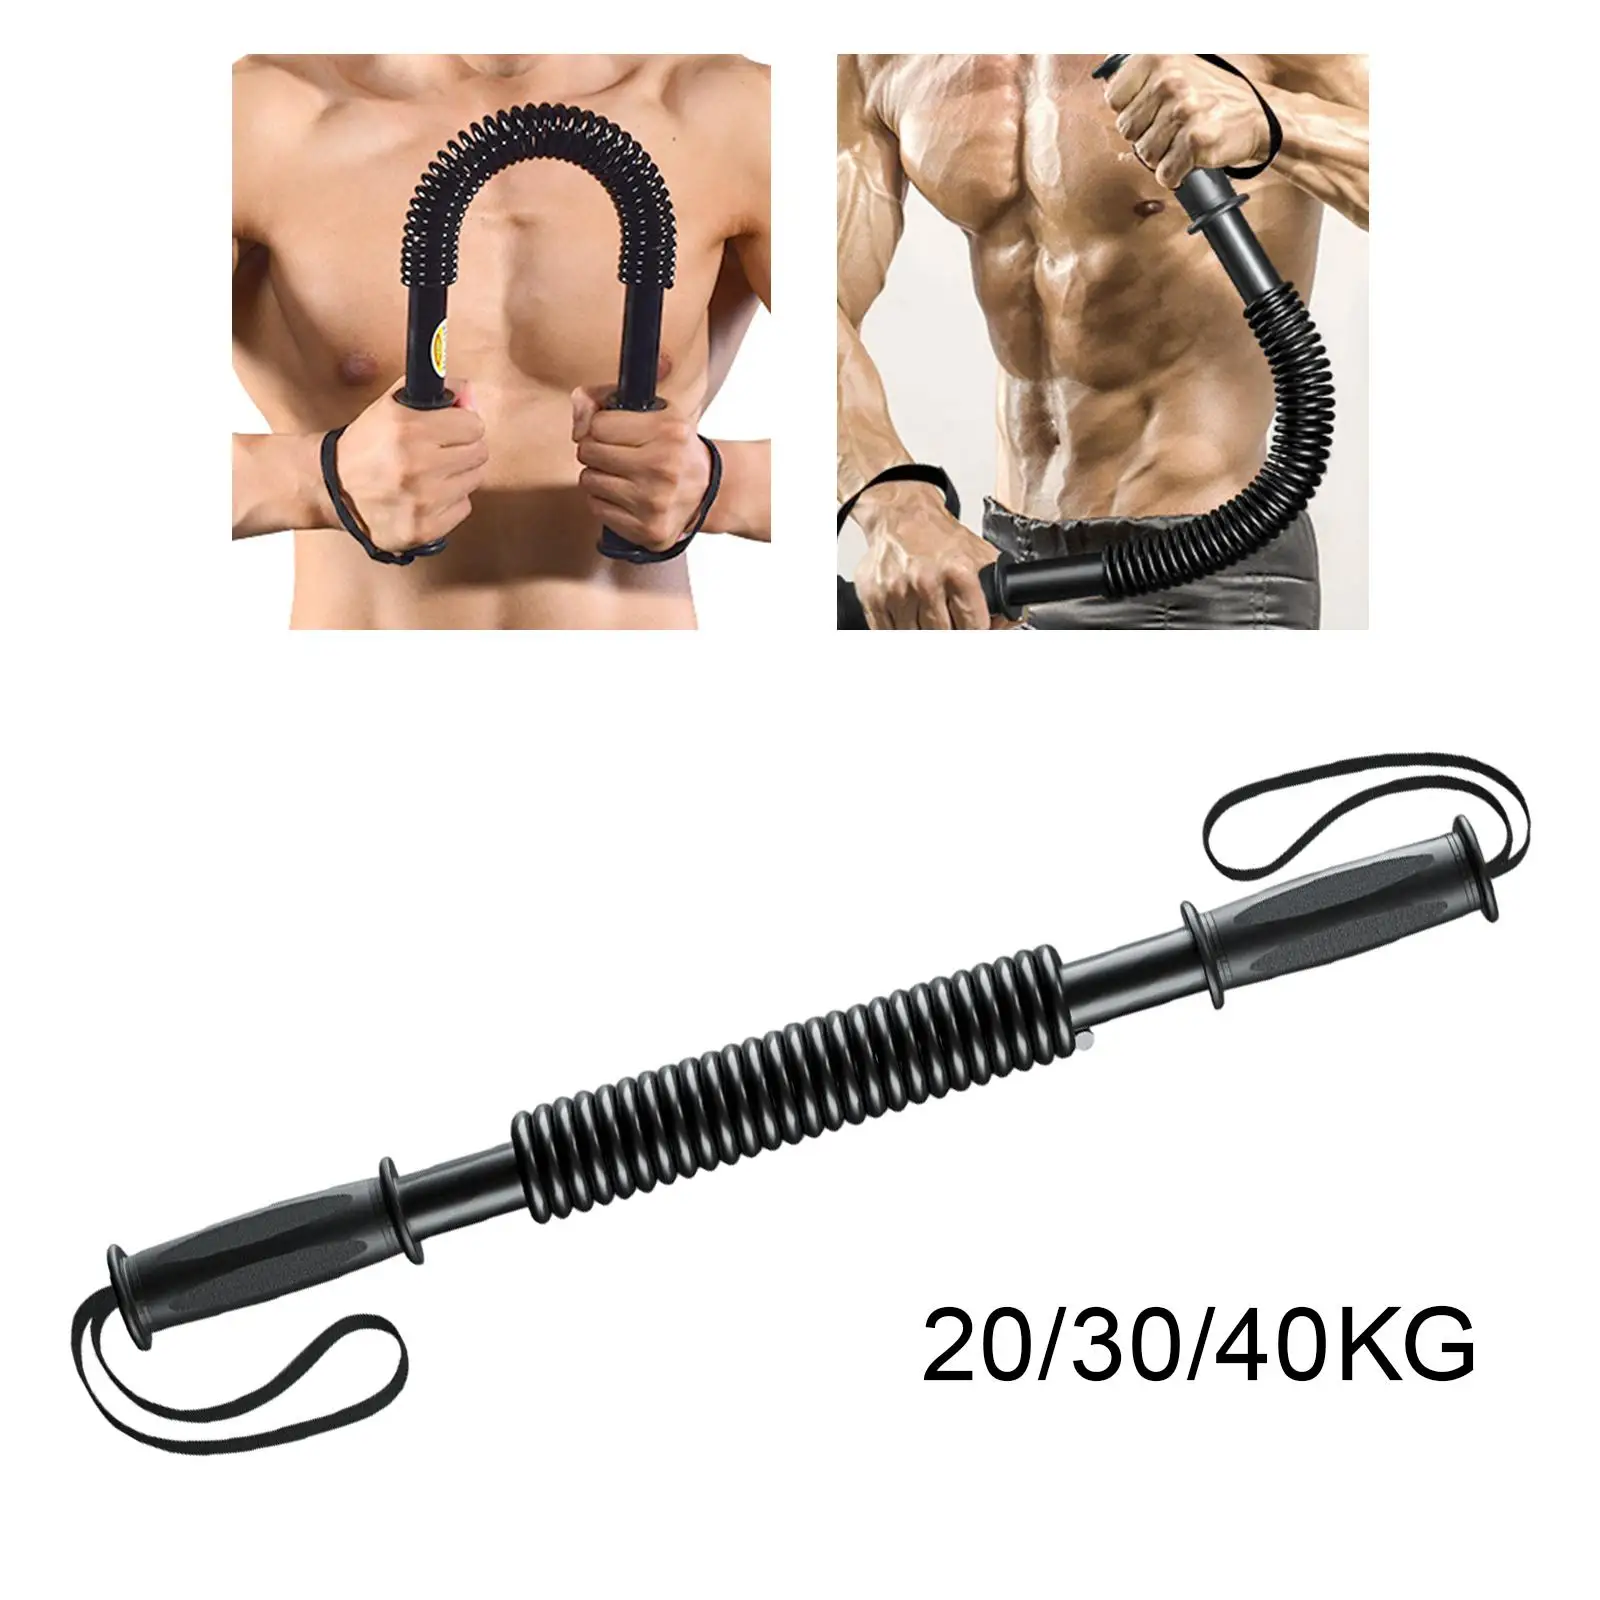 Chest Expander Workout Equipment Upper Body Exercise Spring Power Twister Bar for Trainer Forearm Muscle Pulling Women Men Back